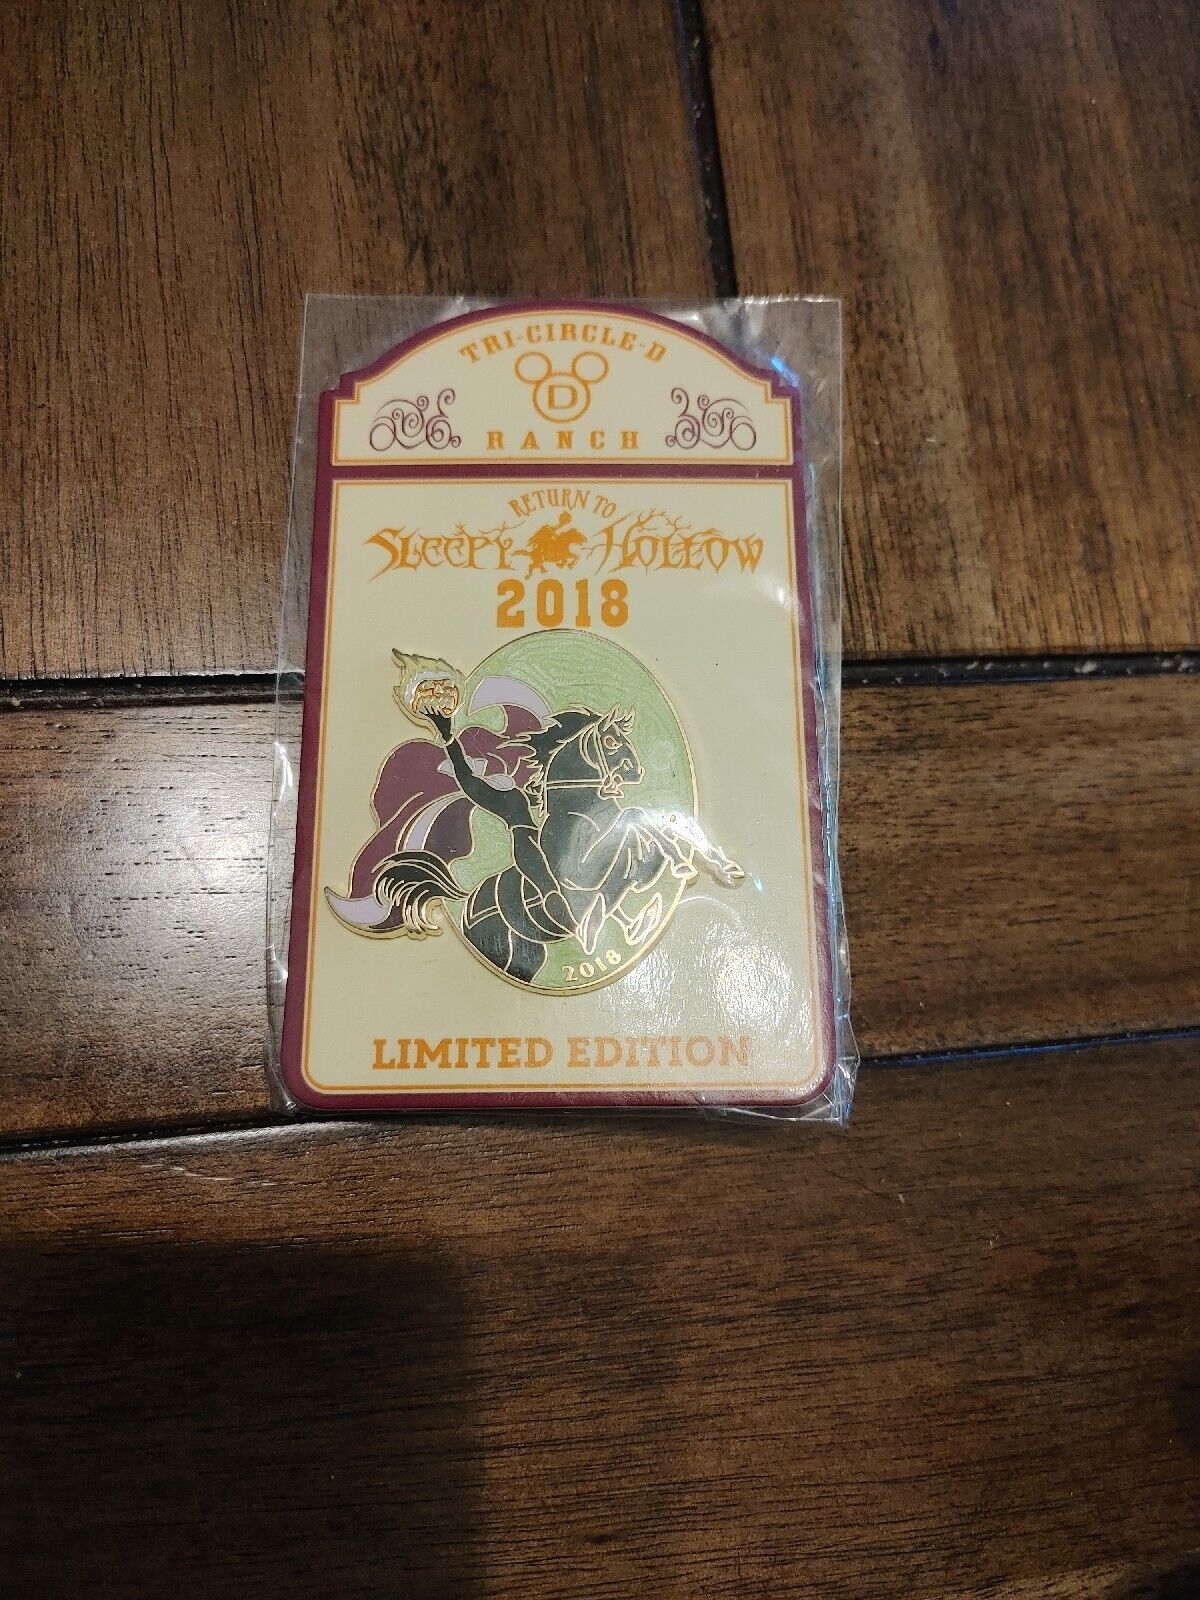 Return To Sleepy Hollow 2018 WDW Tri-circle D Ranch Pin Limited Edition